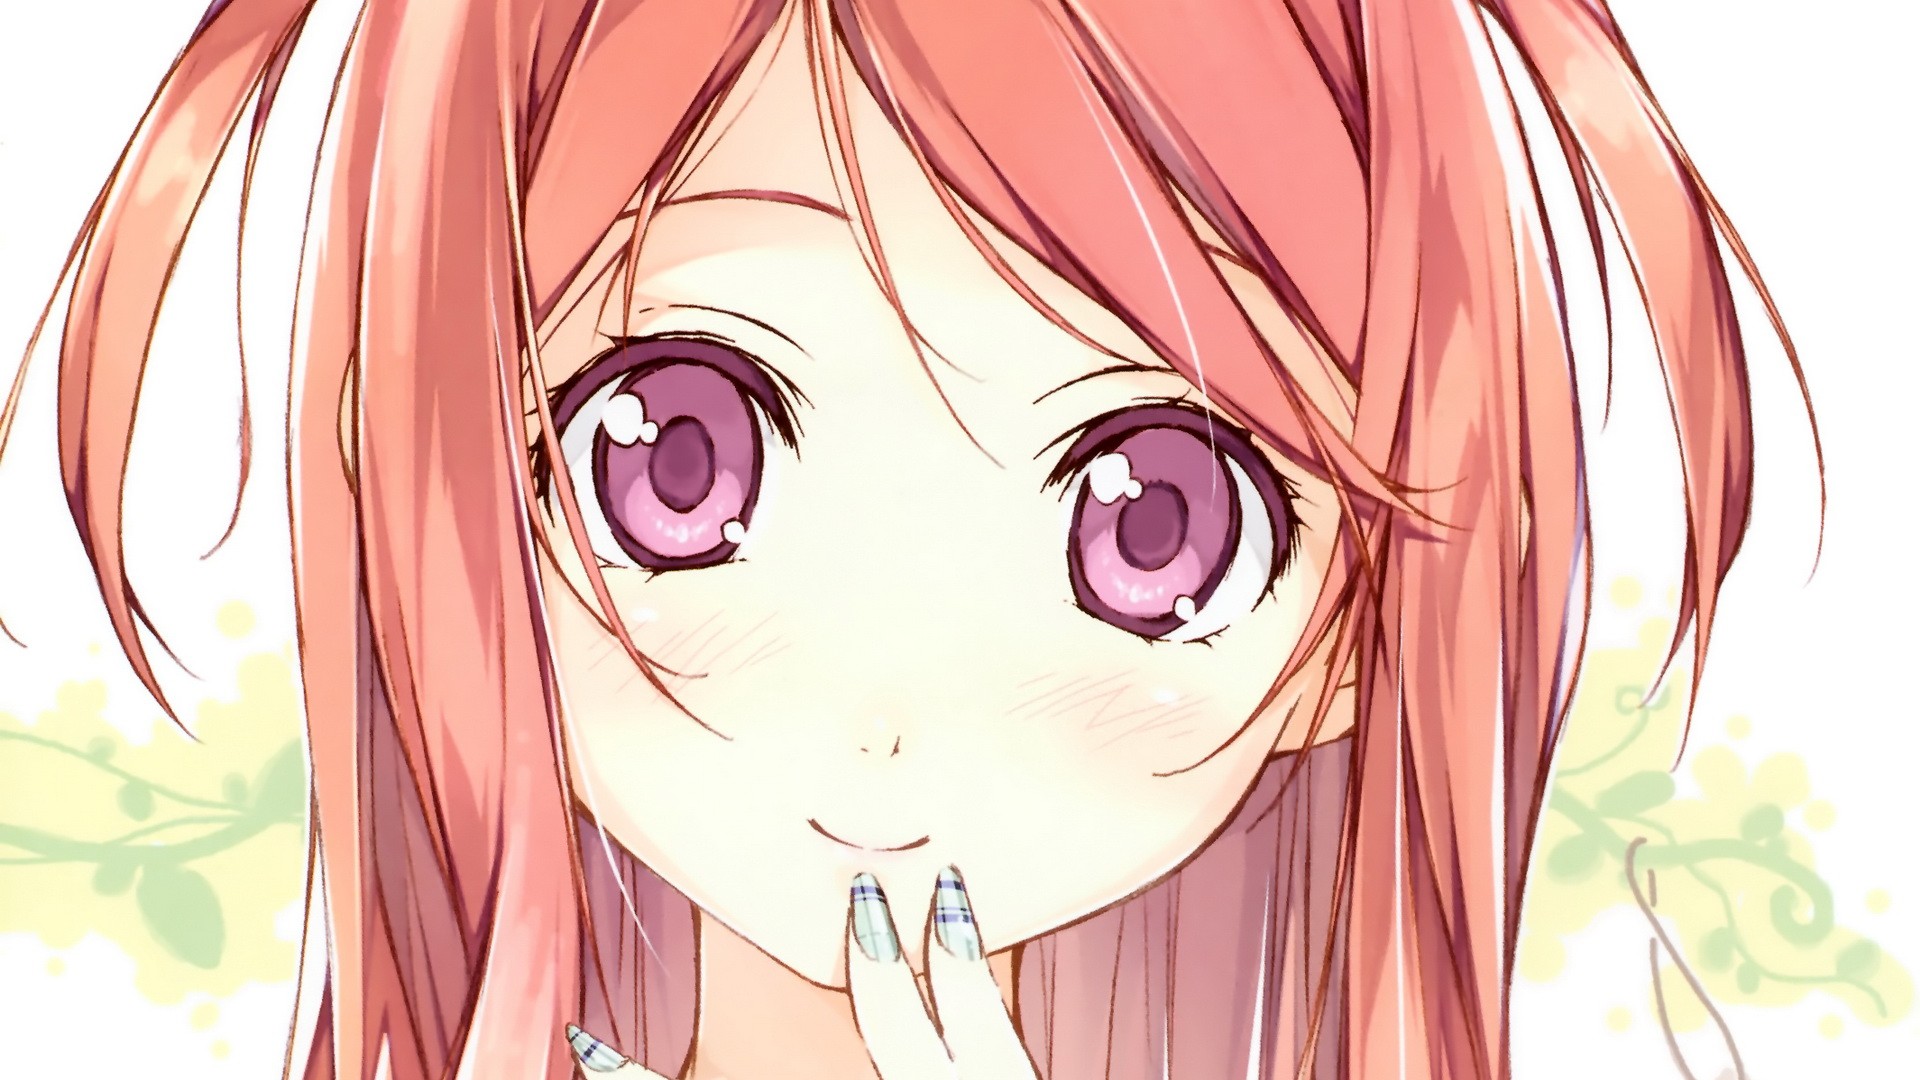 Cute Anime Girl Blushing And Smiling